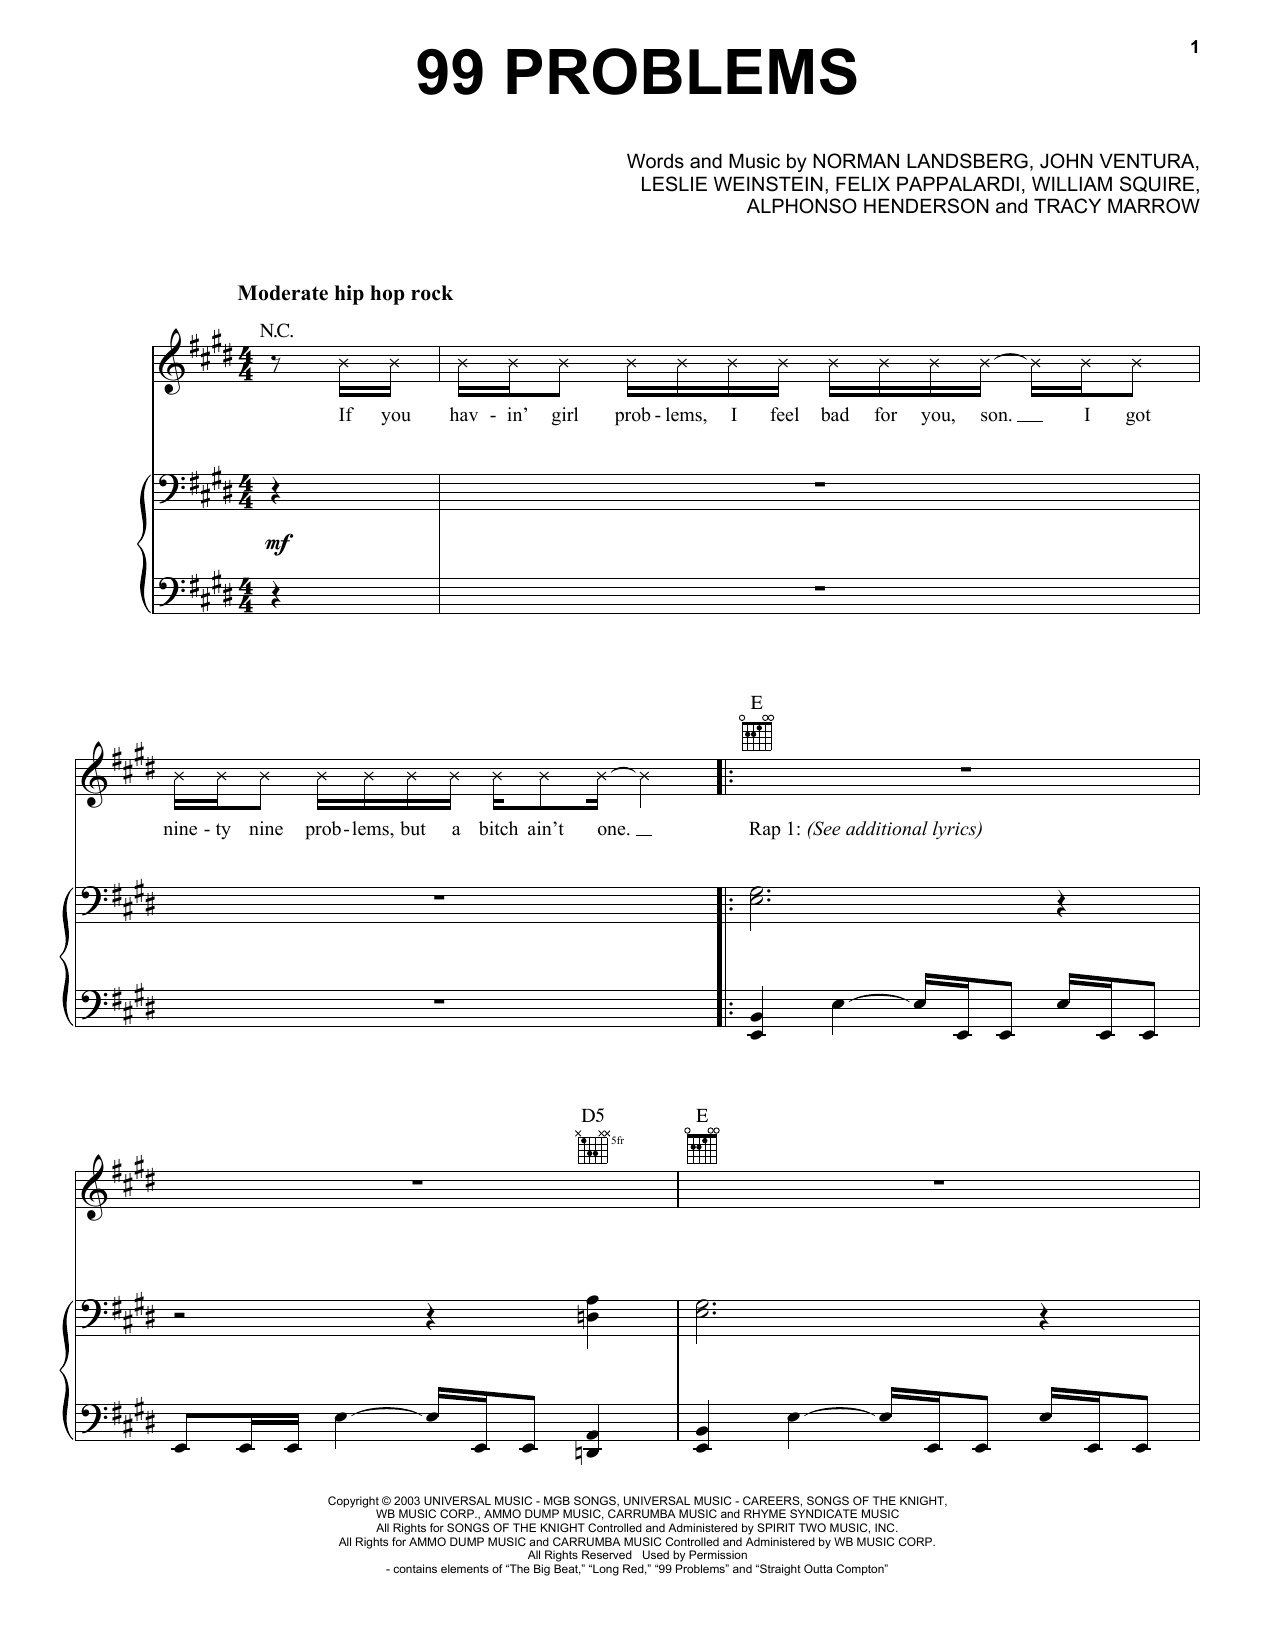 Download Jay-Z 99 Problems Sheet Music